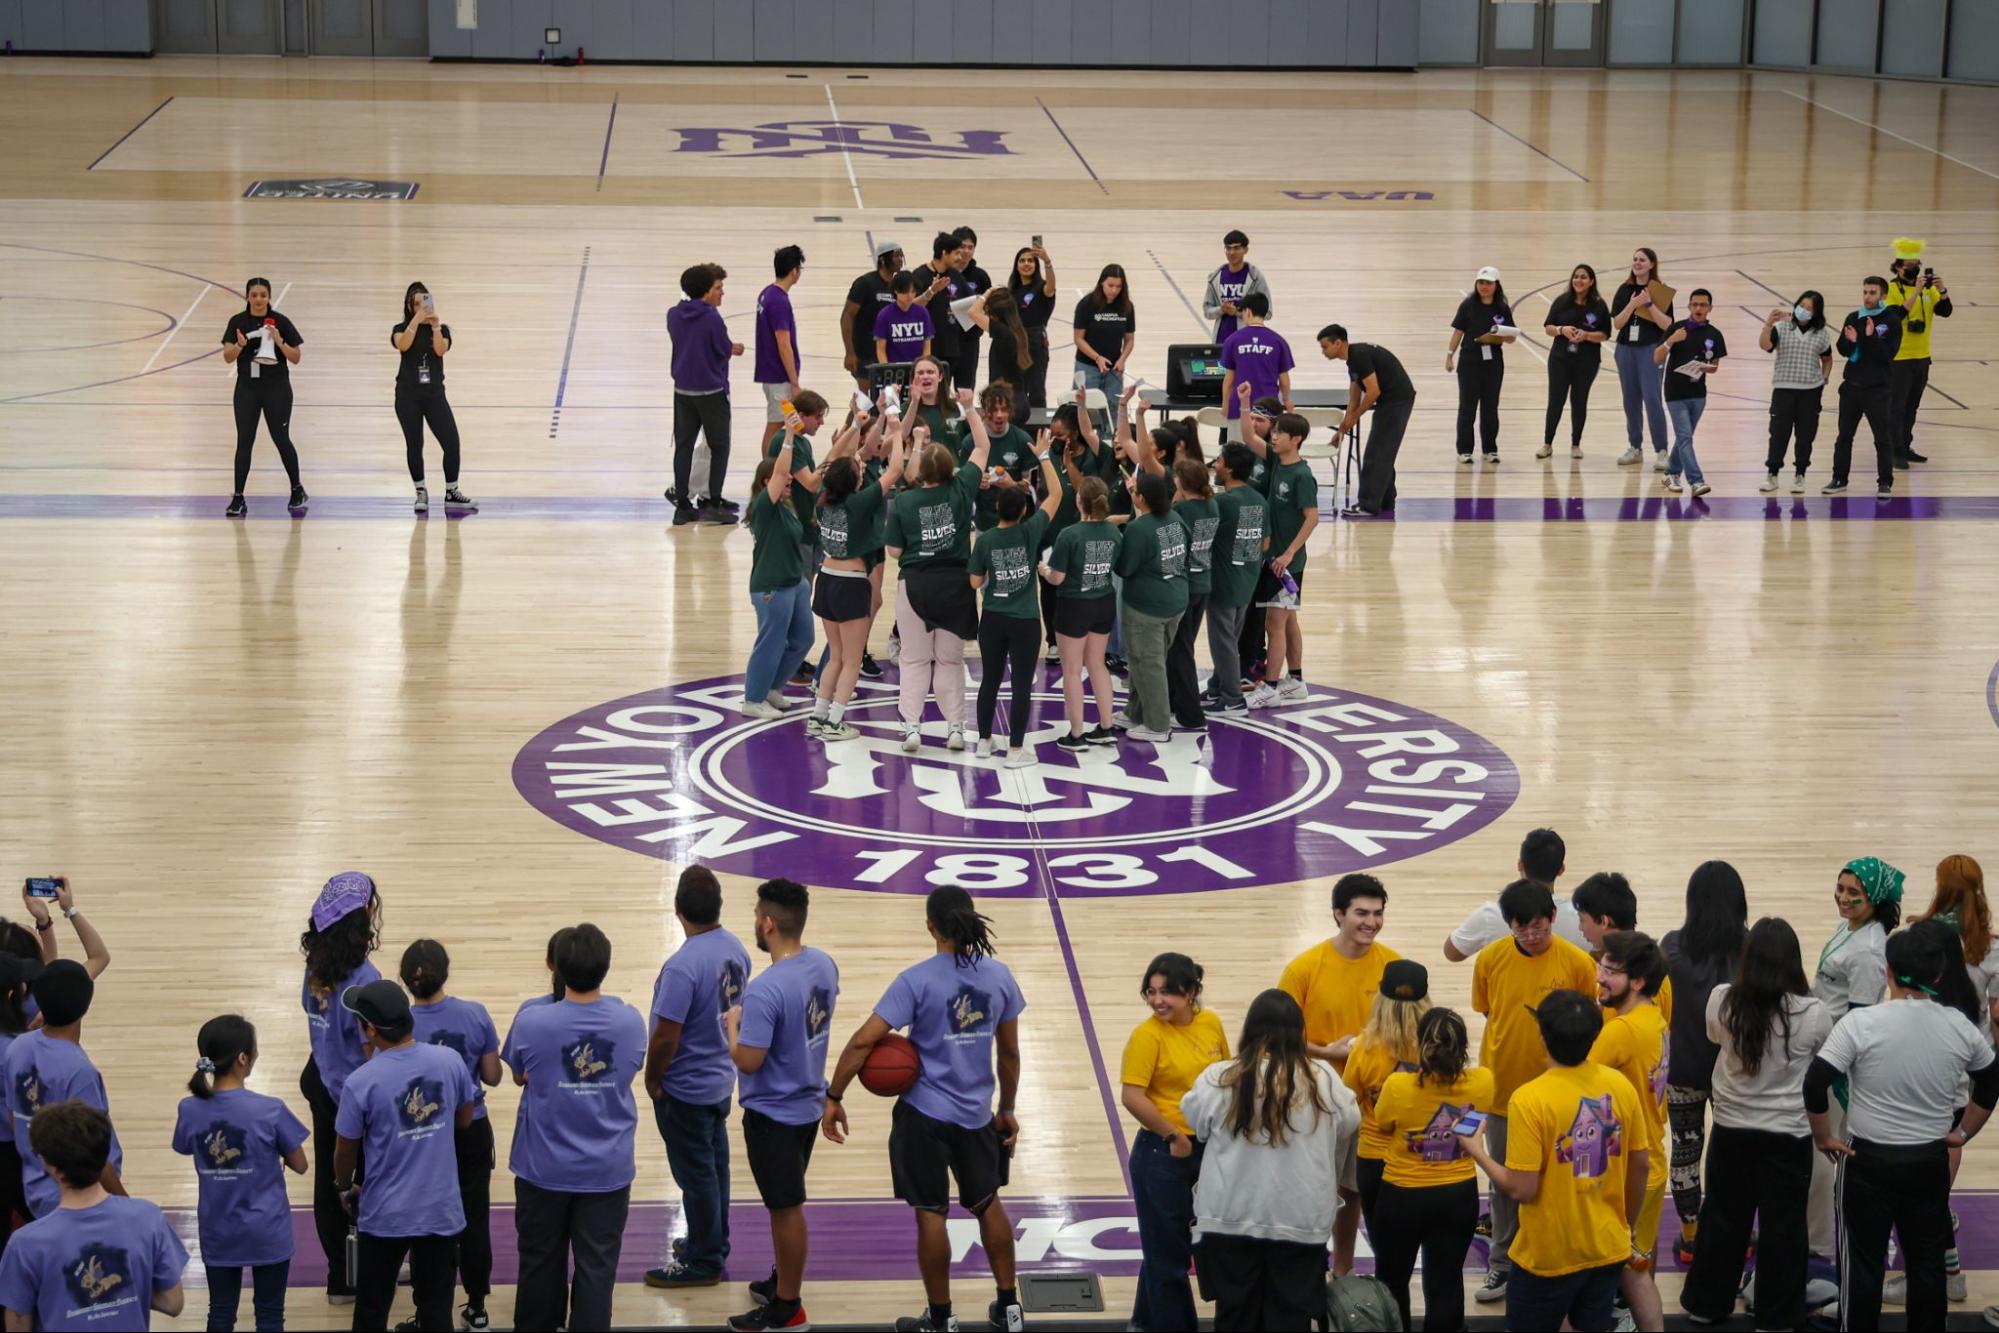 People stand in groups around a basketball court with the N.Y.U. logo. A group wearing matching green shirts stands in a circle at the center of the court.